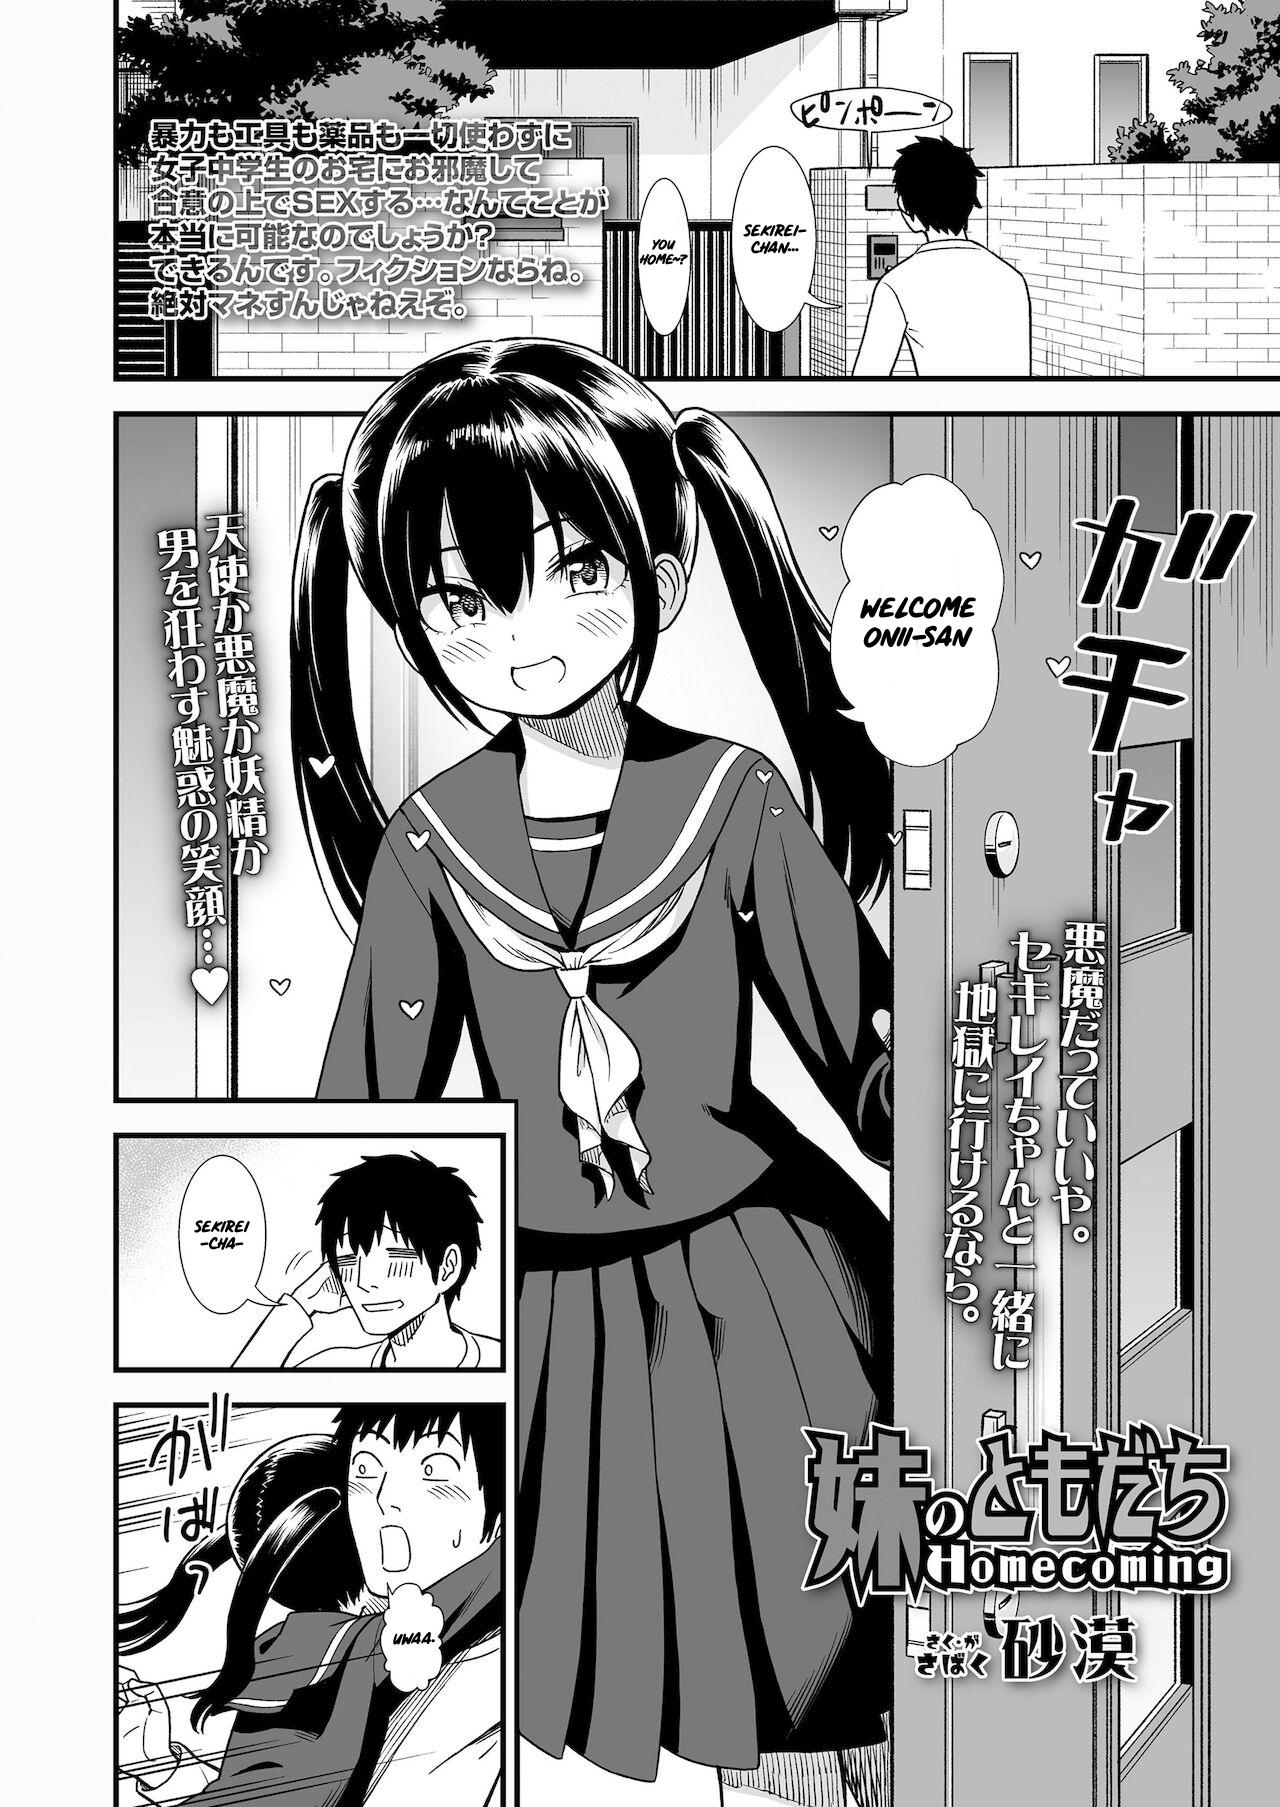 Master Imouto no Tomodachi Homecoming | My Little Sister's Friend Homecoming Deep - Page 2